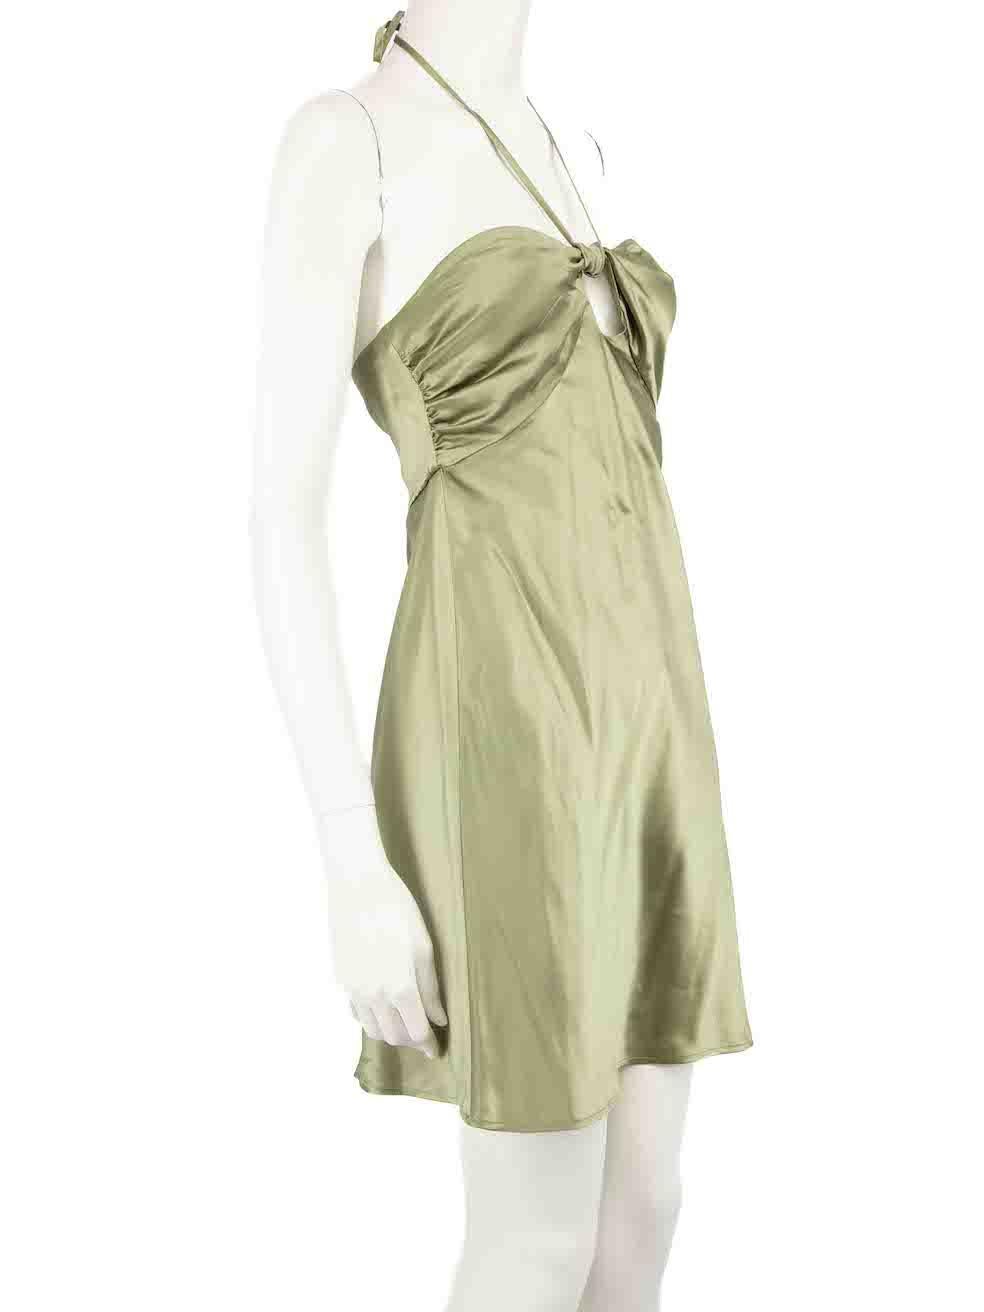 CONDITION is Never worn, with tags. No visible wear to dress is evident on this new Reformation designer resale item.
 
 
 
 Details
 
 
 Model: Sorrentine
 
 Green
 
 Silk
 
 Dress
 
 Mini
 
 Halterneck- back neck tie
 
 Back zip and hook